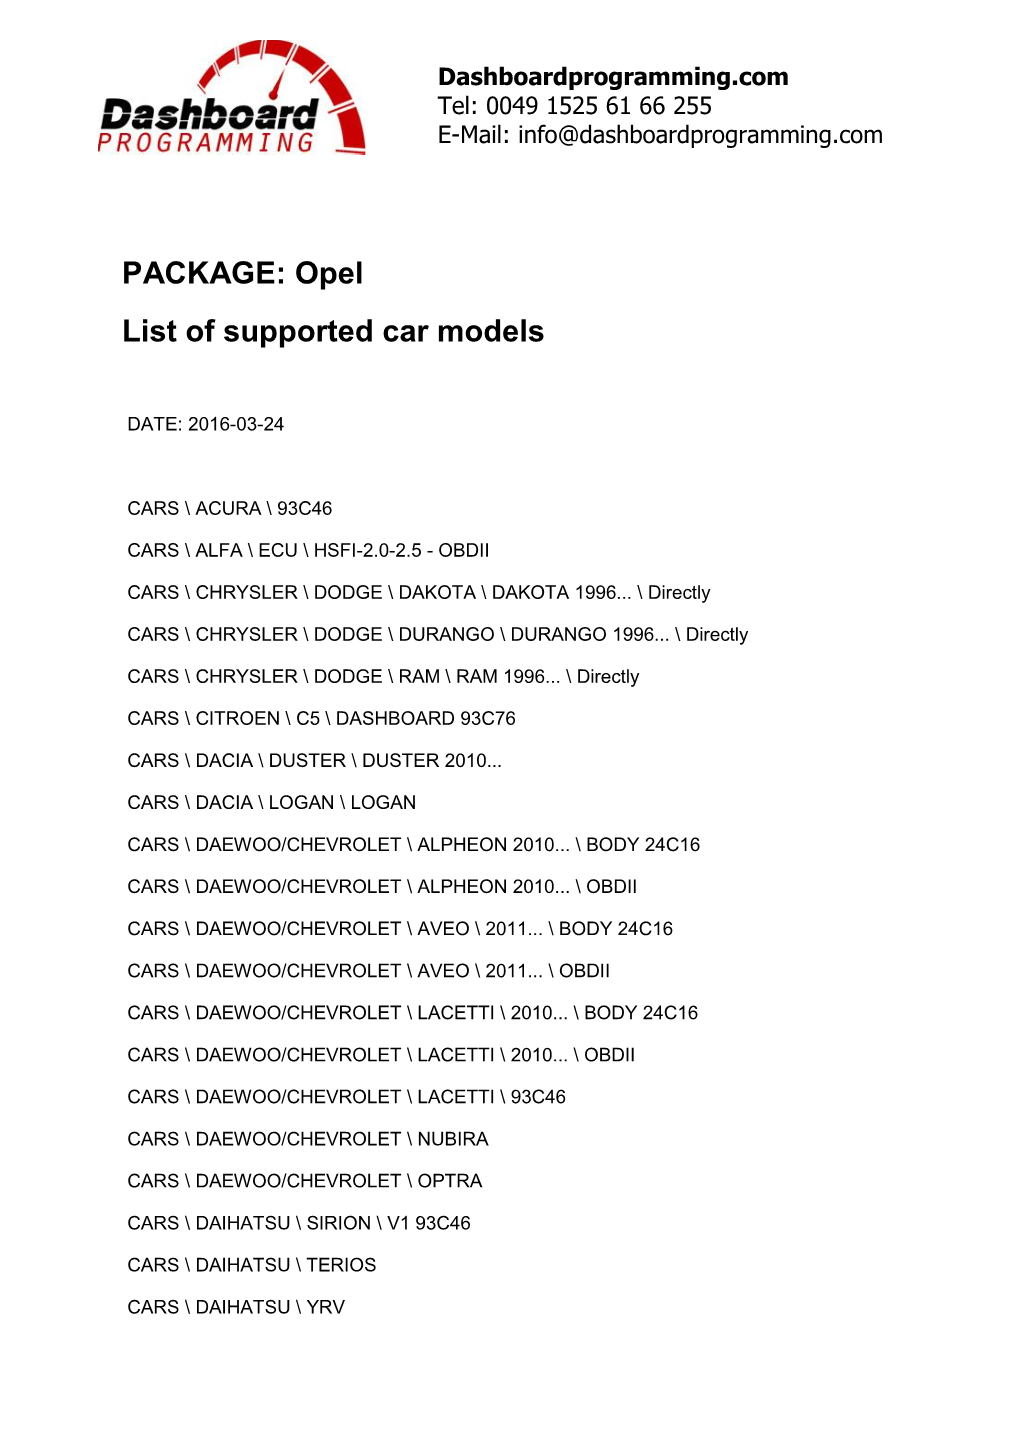 PACKAGE: Opel List of Supported Car Models